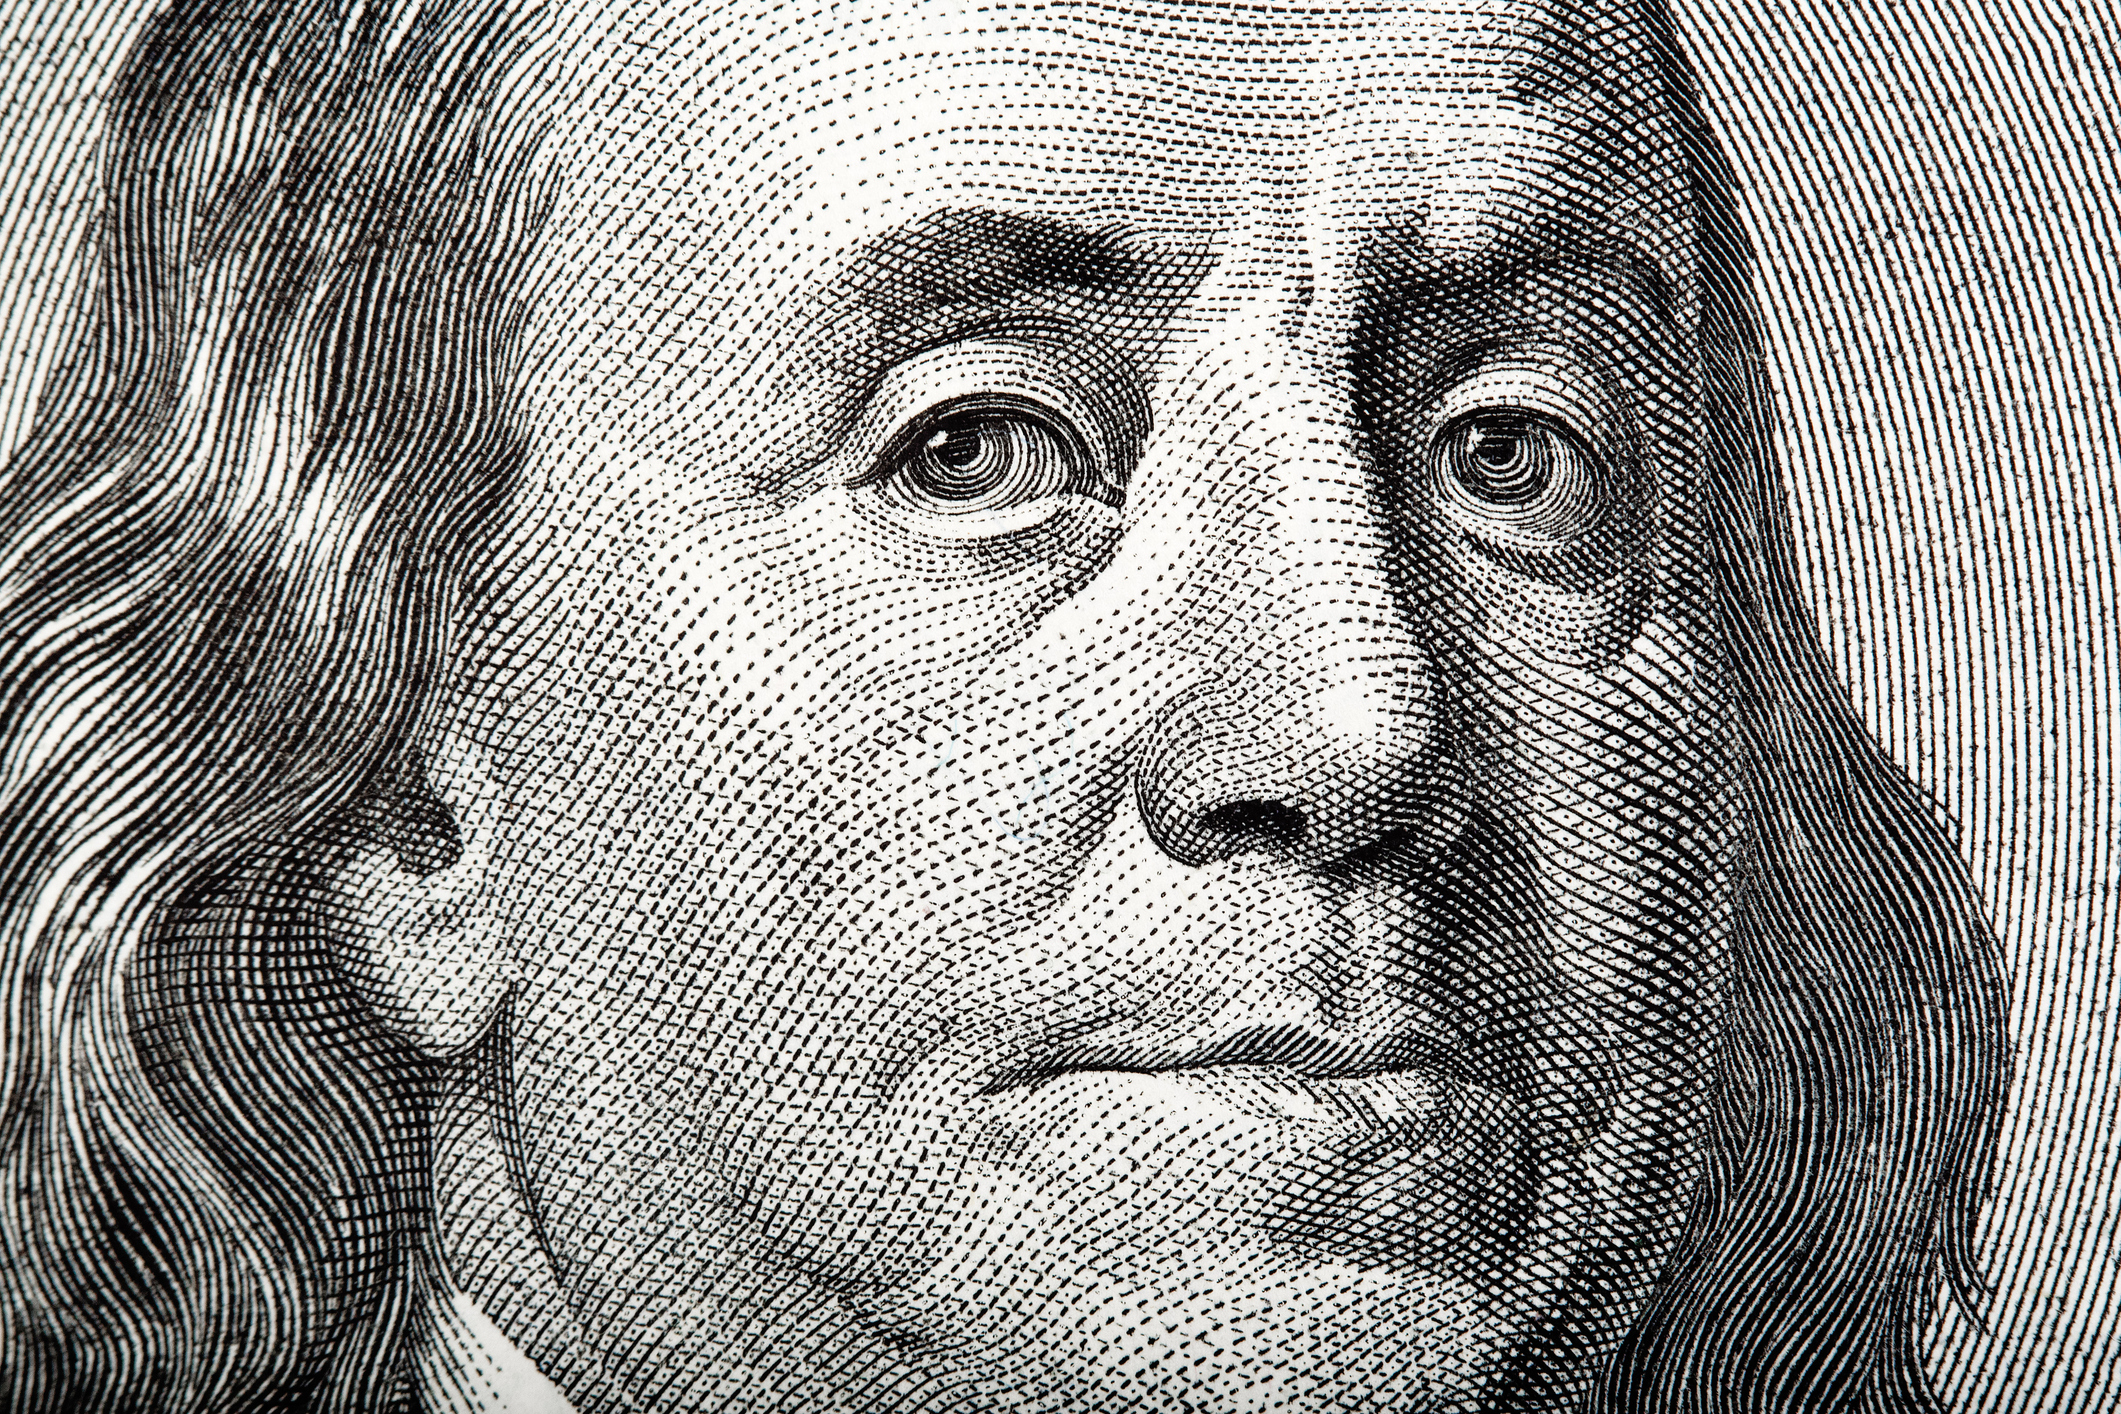 benjamin-franklin-drawing-at-paintingvalley-explore-collection-of